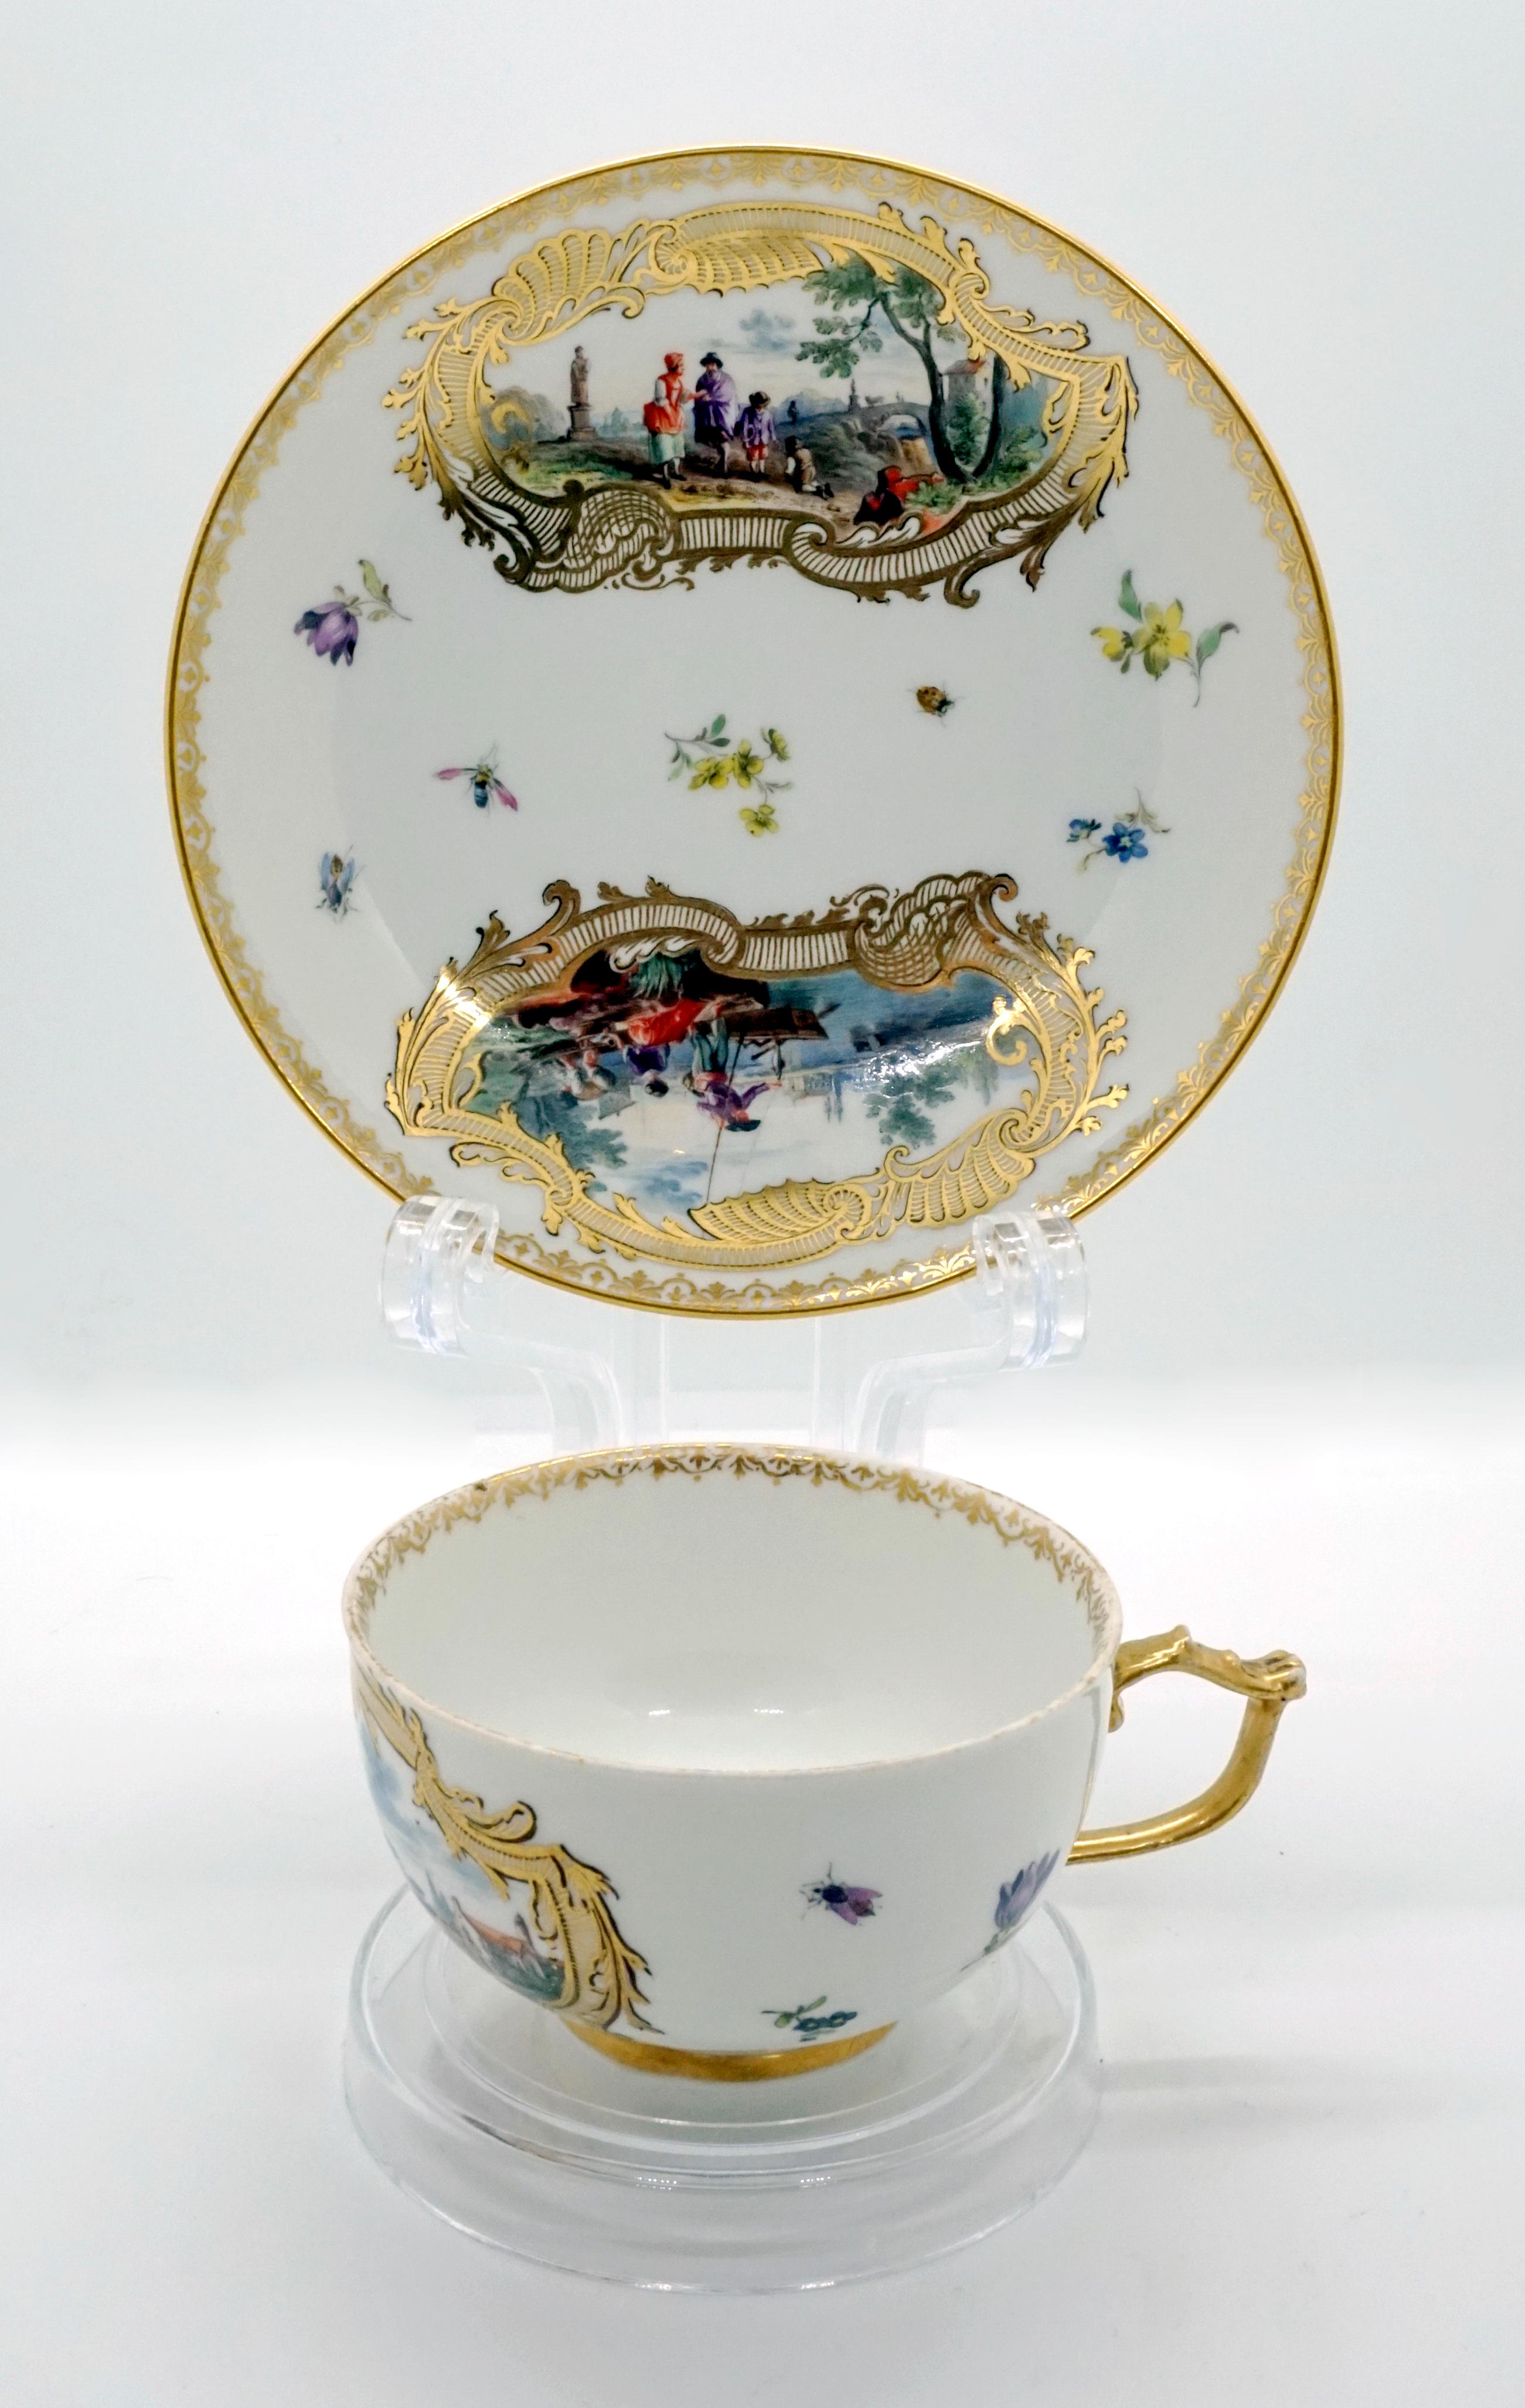 Excellent piece from The Meissen/Germany Manufactory

Both the cup and the saucer have elaborate on-glaze painting and gold decoration. The cup is painted on the side opposite the handle with a gold-framed cartouche, on which a landscape with